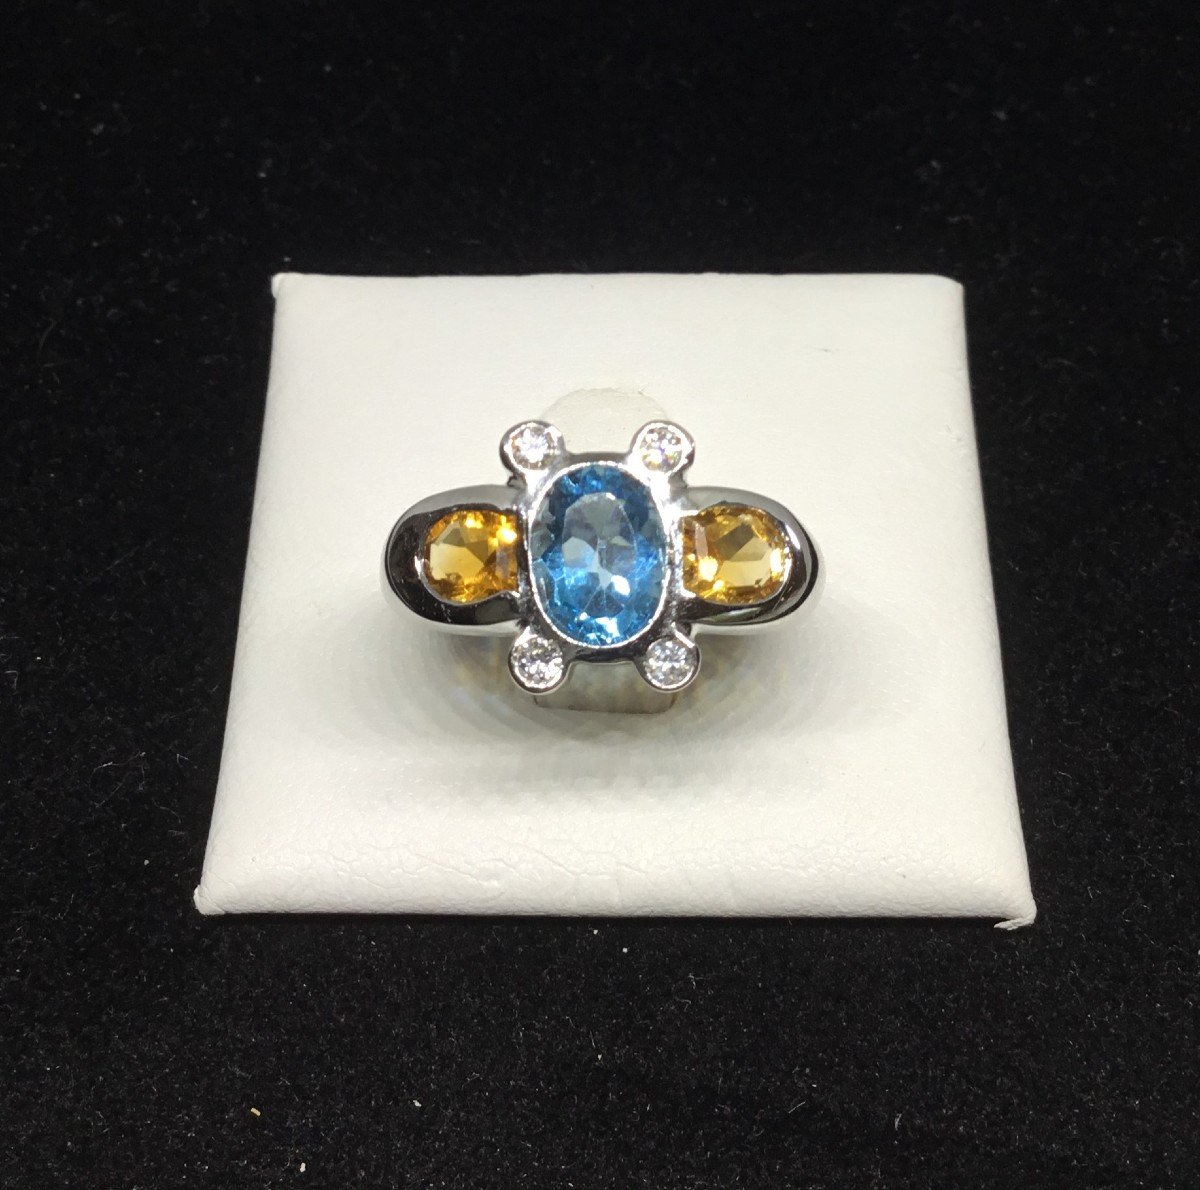 Gold, Topaz, Sapphires And Diamonds Ring